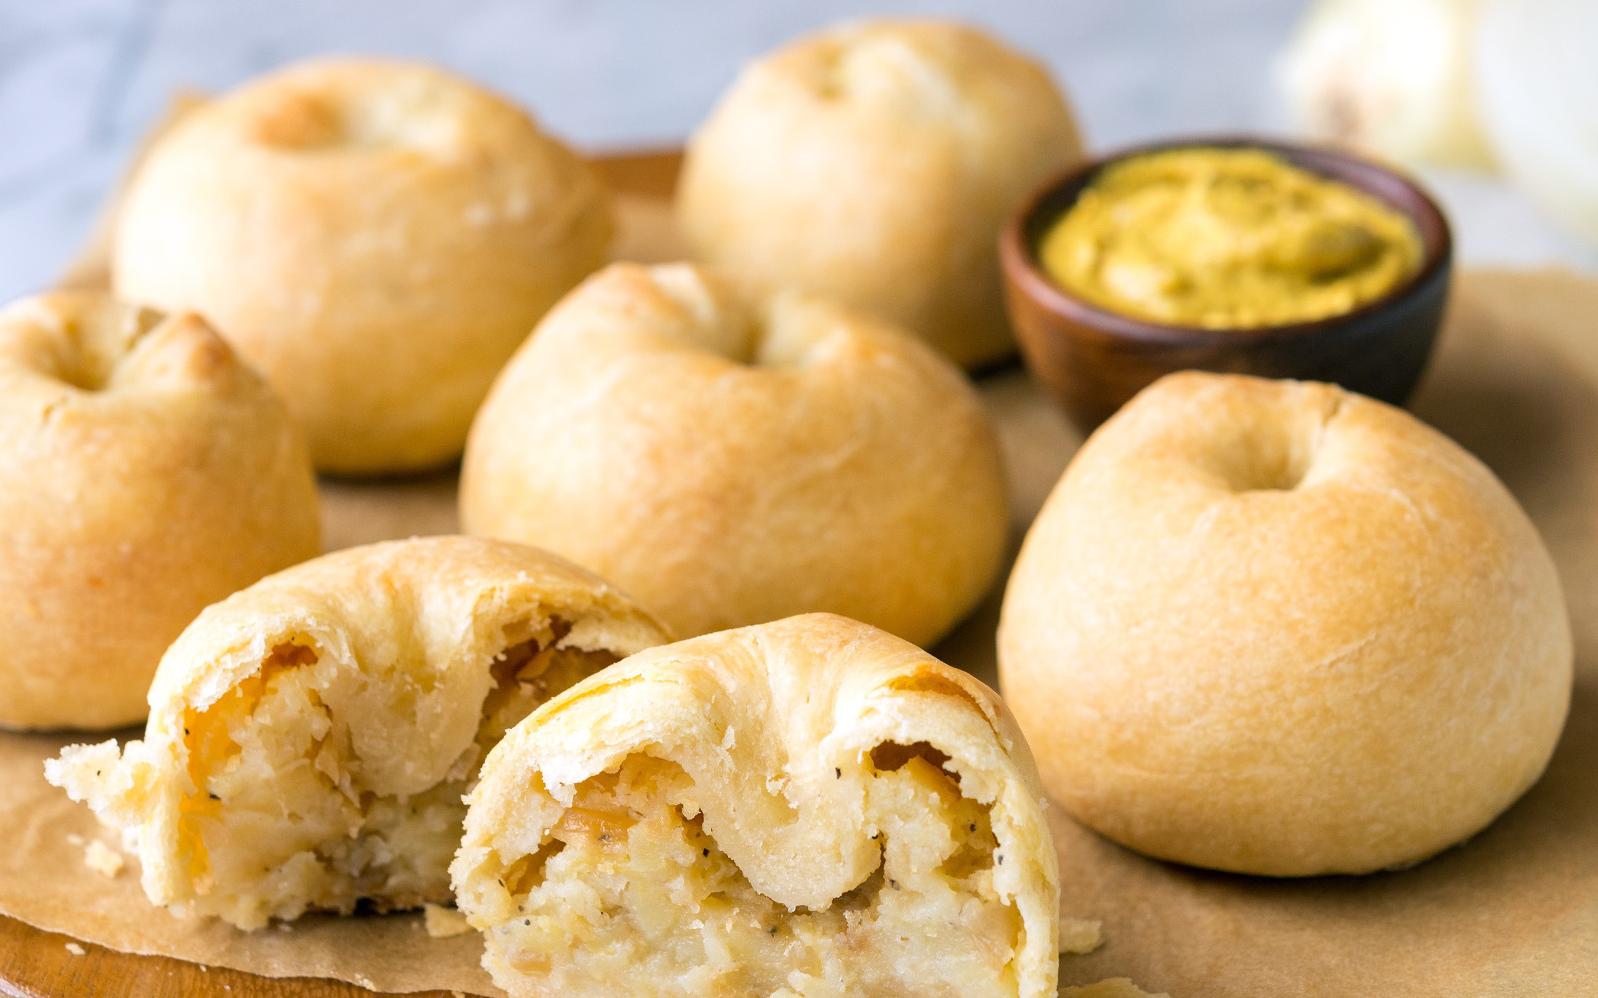  With their flaky crust and savory filling, these knishes are hard to resist.